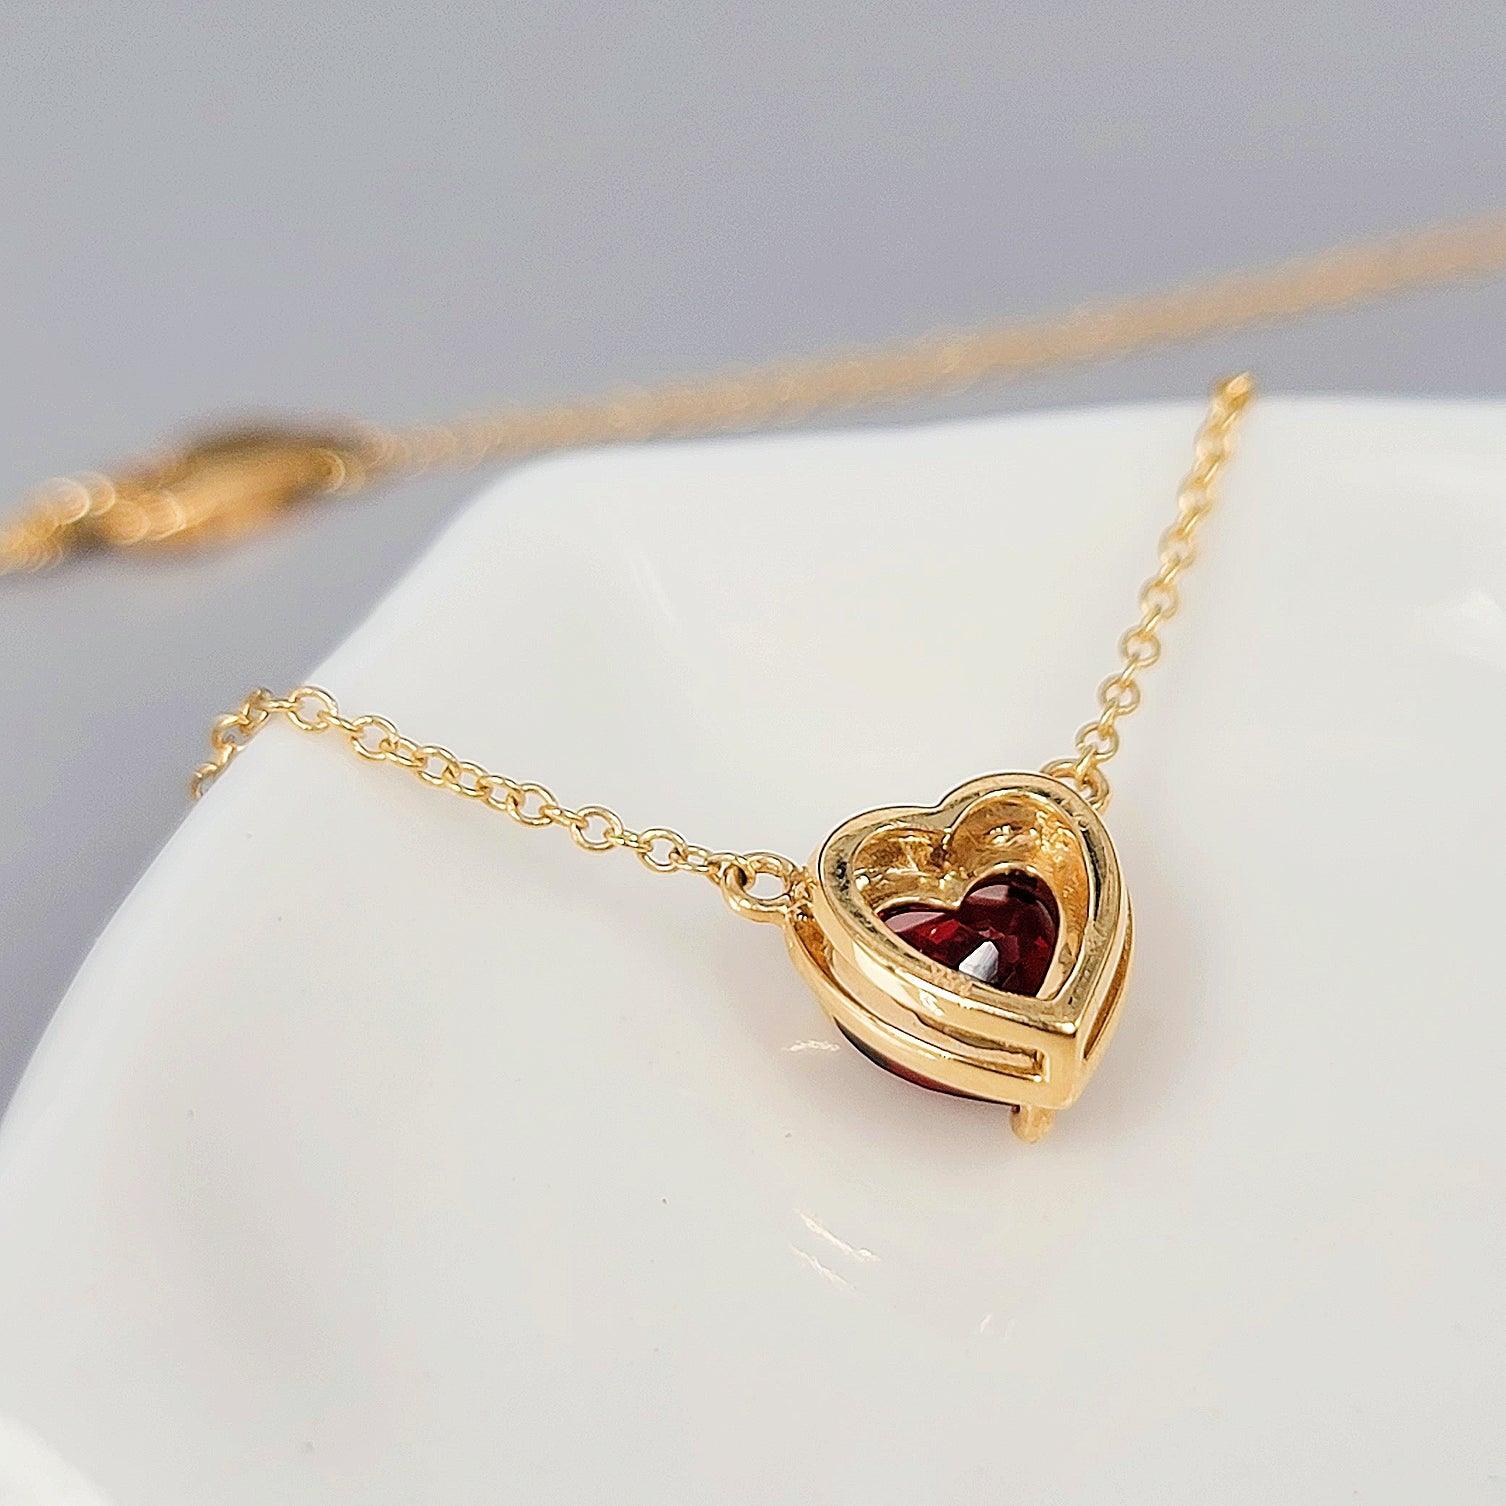 Buy Garnet Heart Pendant, 925 Sterling Silver, Heart Shape Necklace,  January Birthstone, Gift for Her, Anniversary Pendant, Simple Charm Pendant  Online in India… | Heart shaped necklace, Garnet pendant, Gemstones jewelry  rings